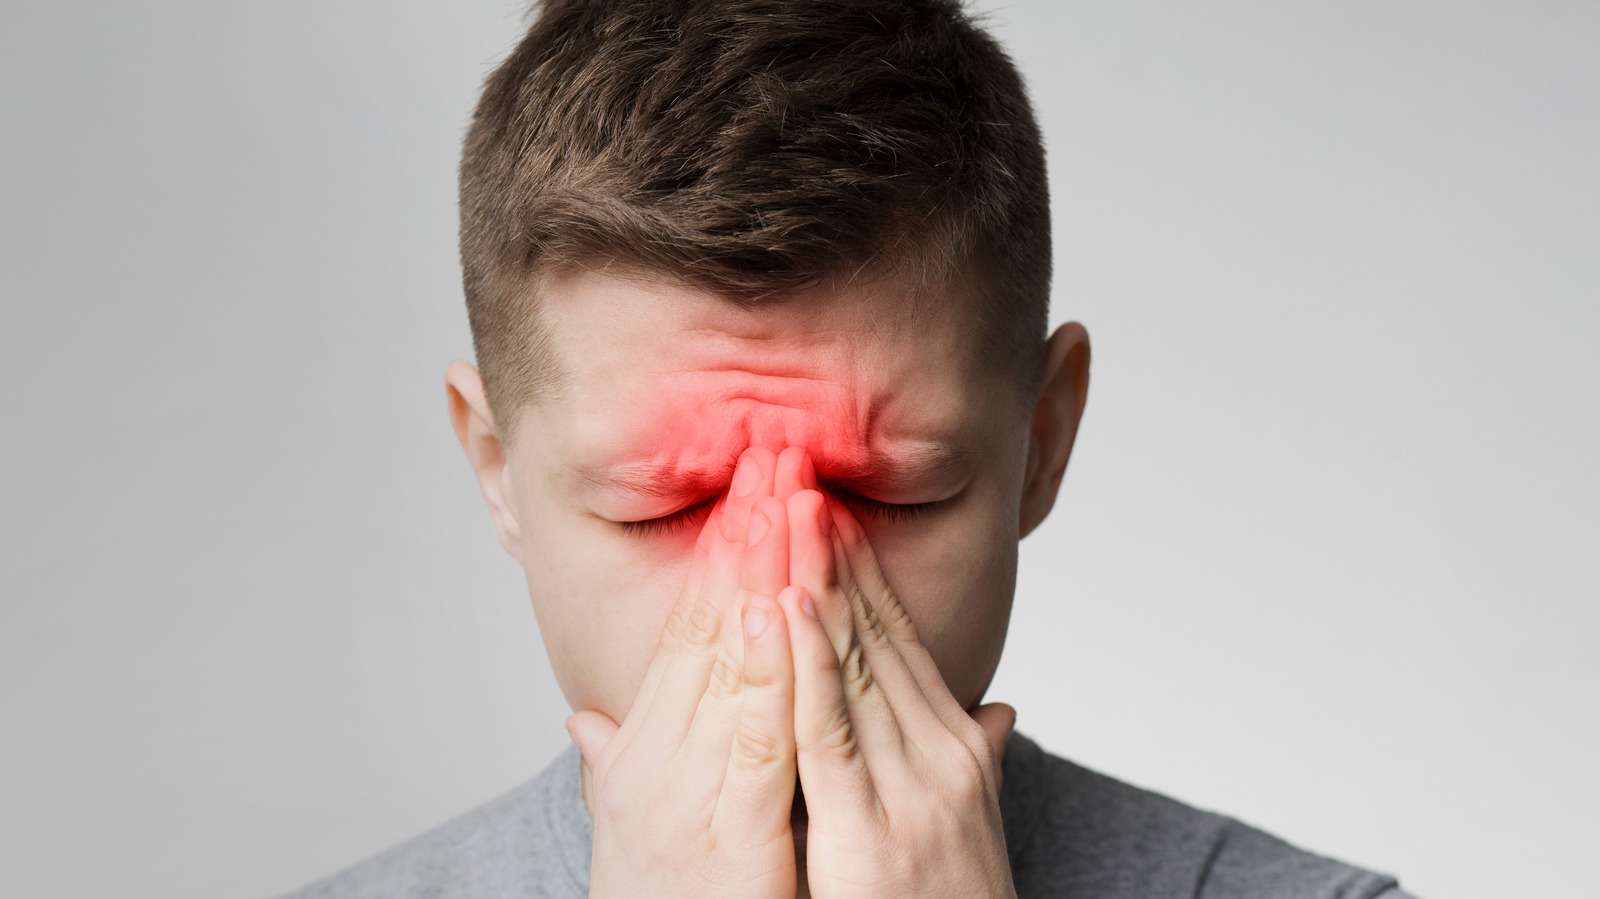 Can You Get A Headache From Allergies?